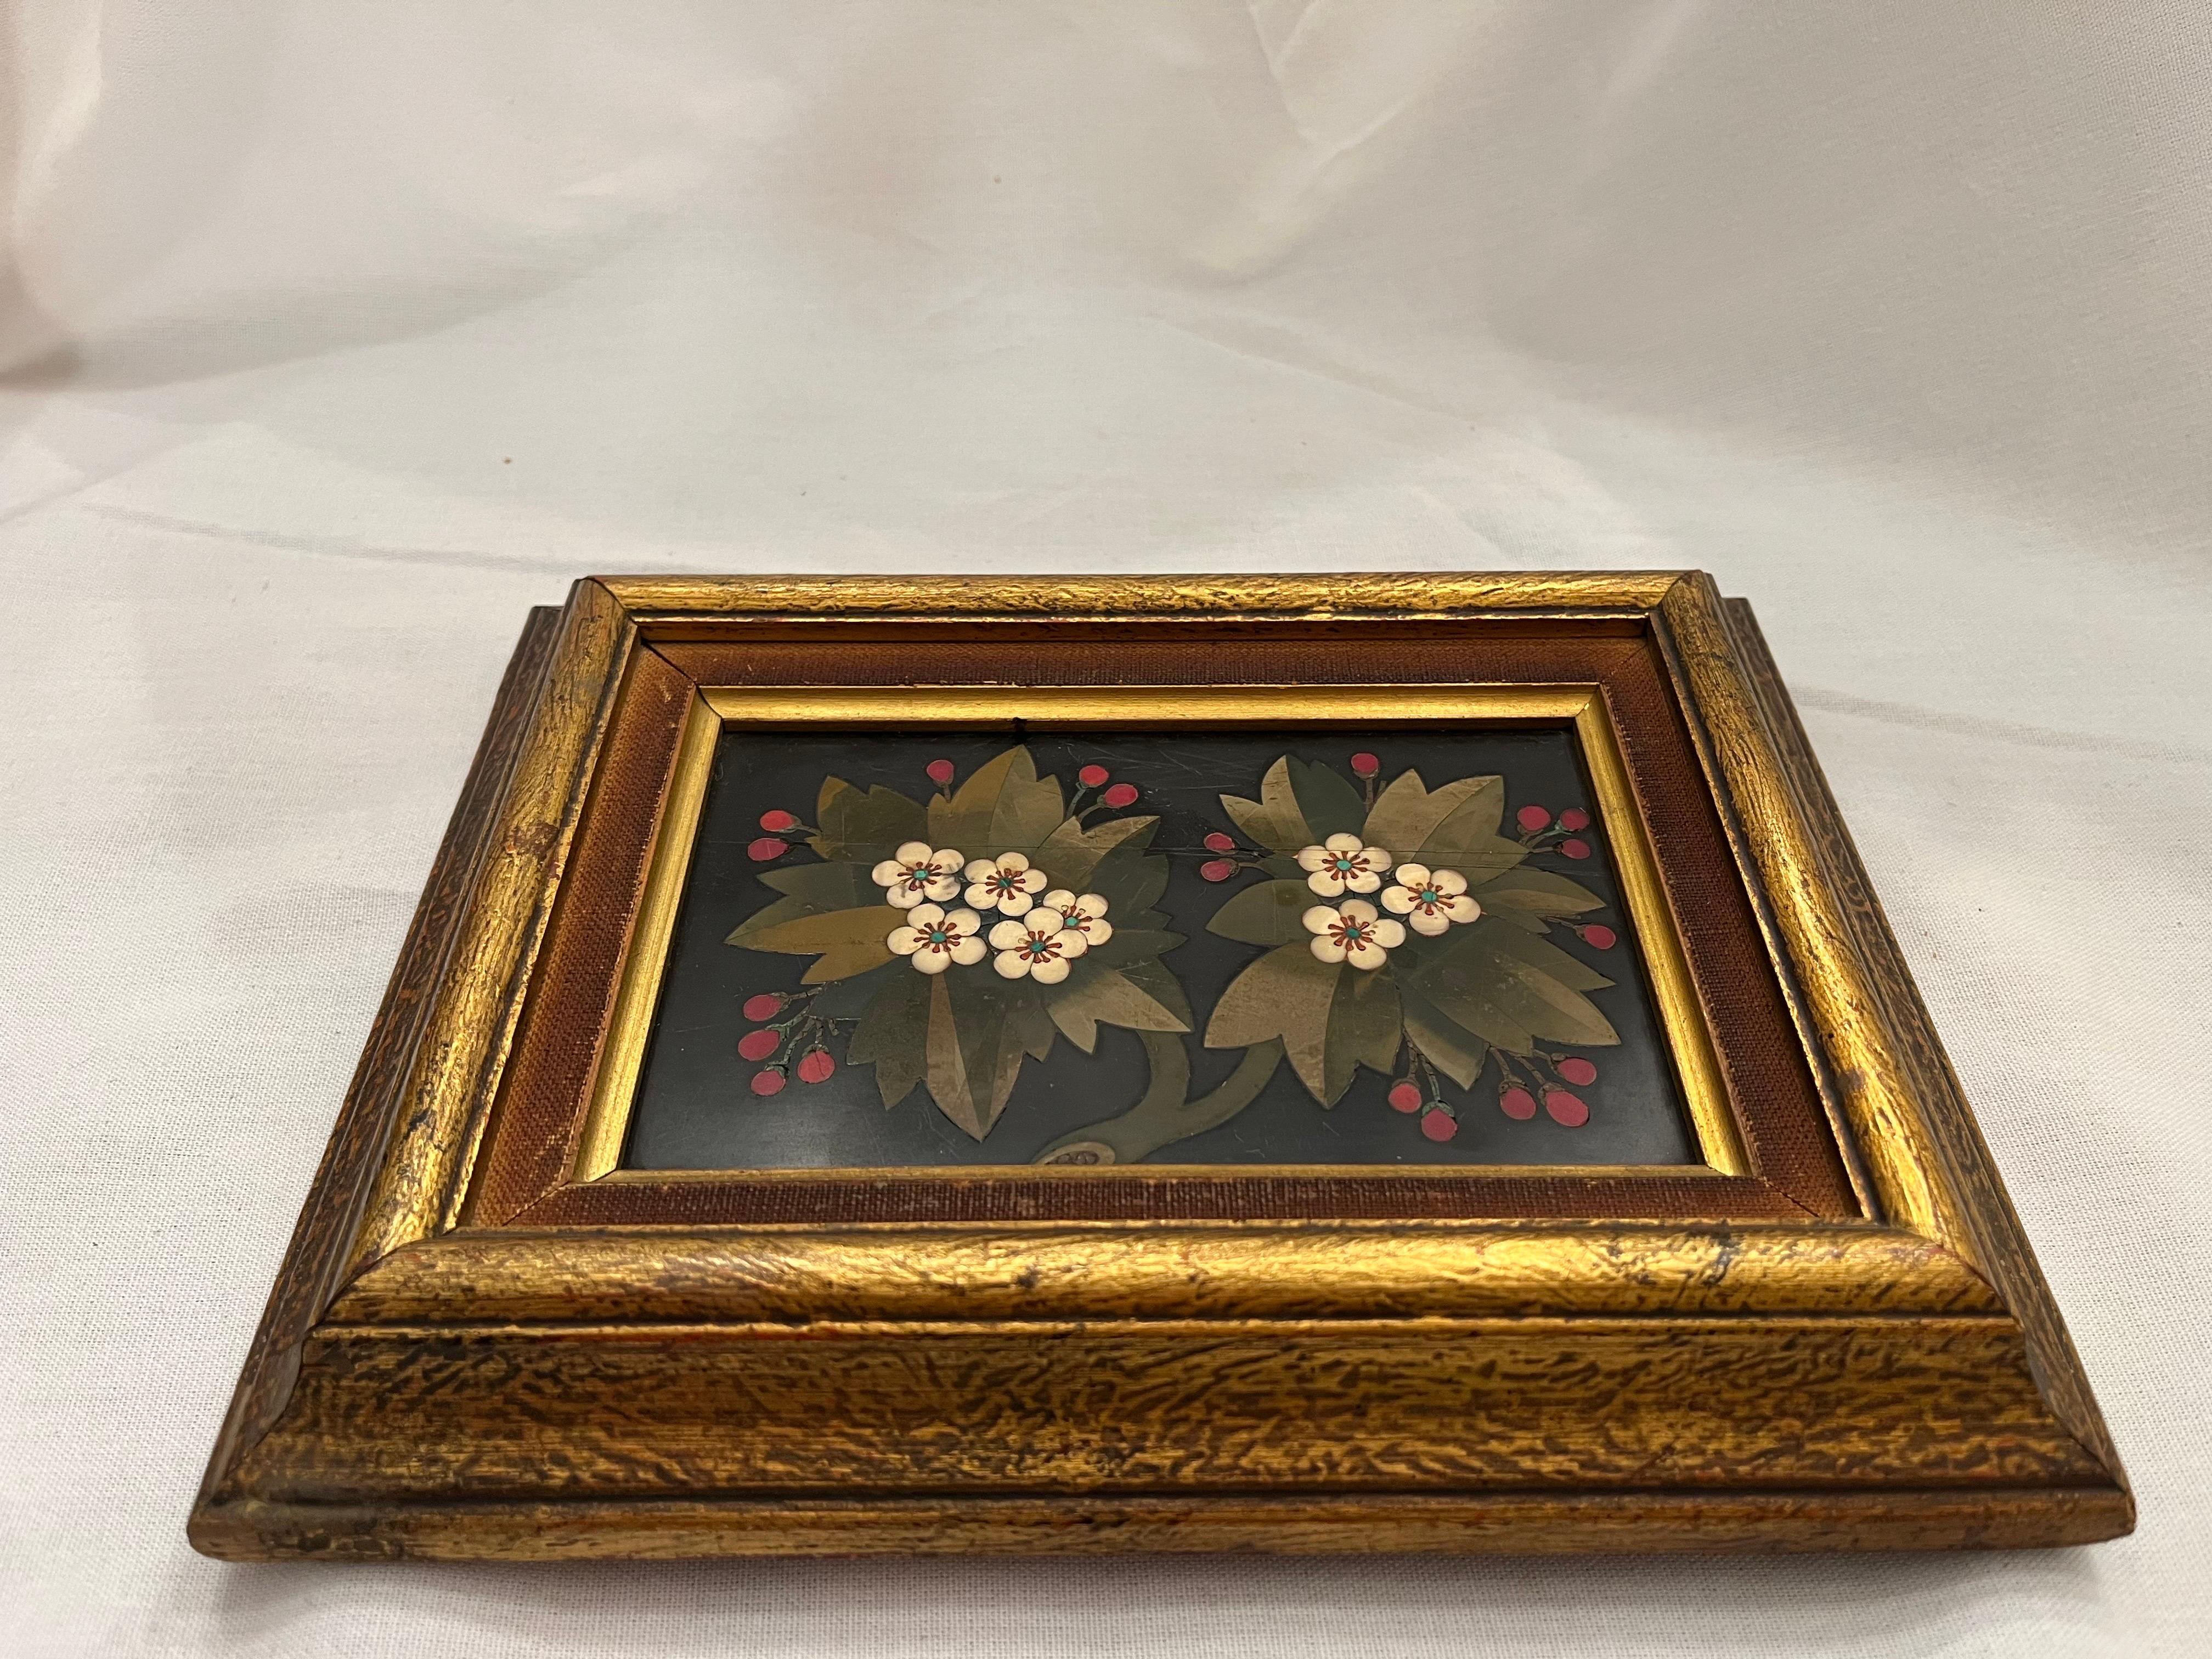 Hand-Crafted 19th Century Italian Pietra Dura Antique Floral Still Life Hard Stone in Frame